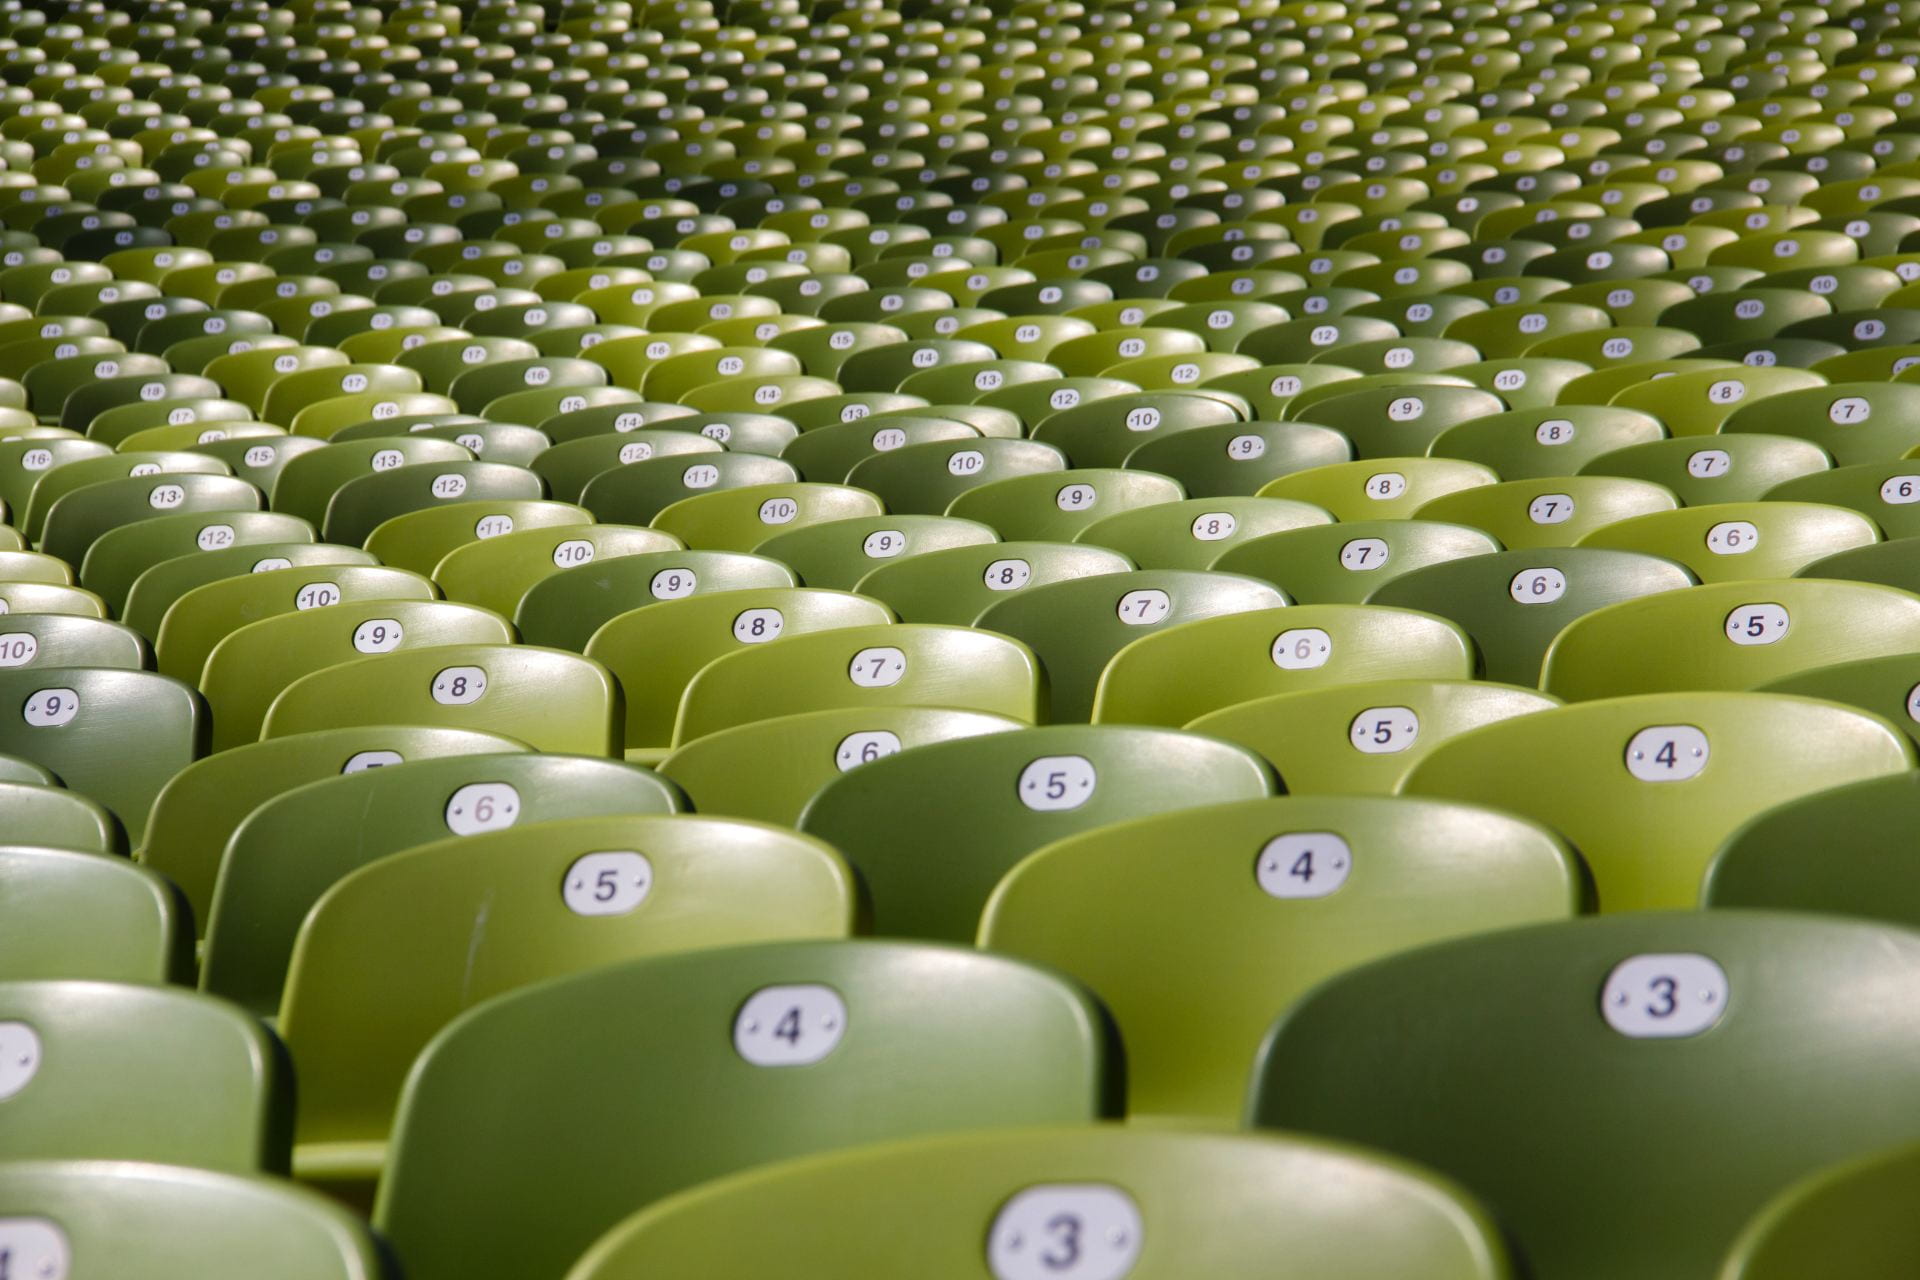 rows of green chairs that are all numbered